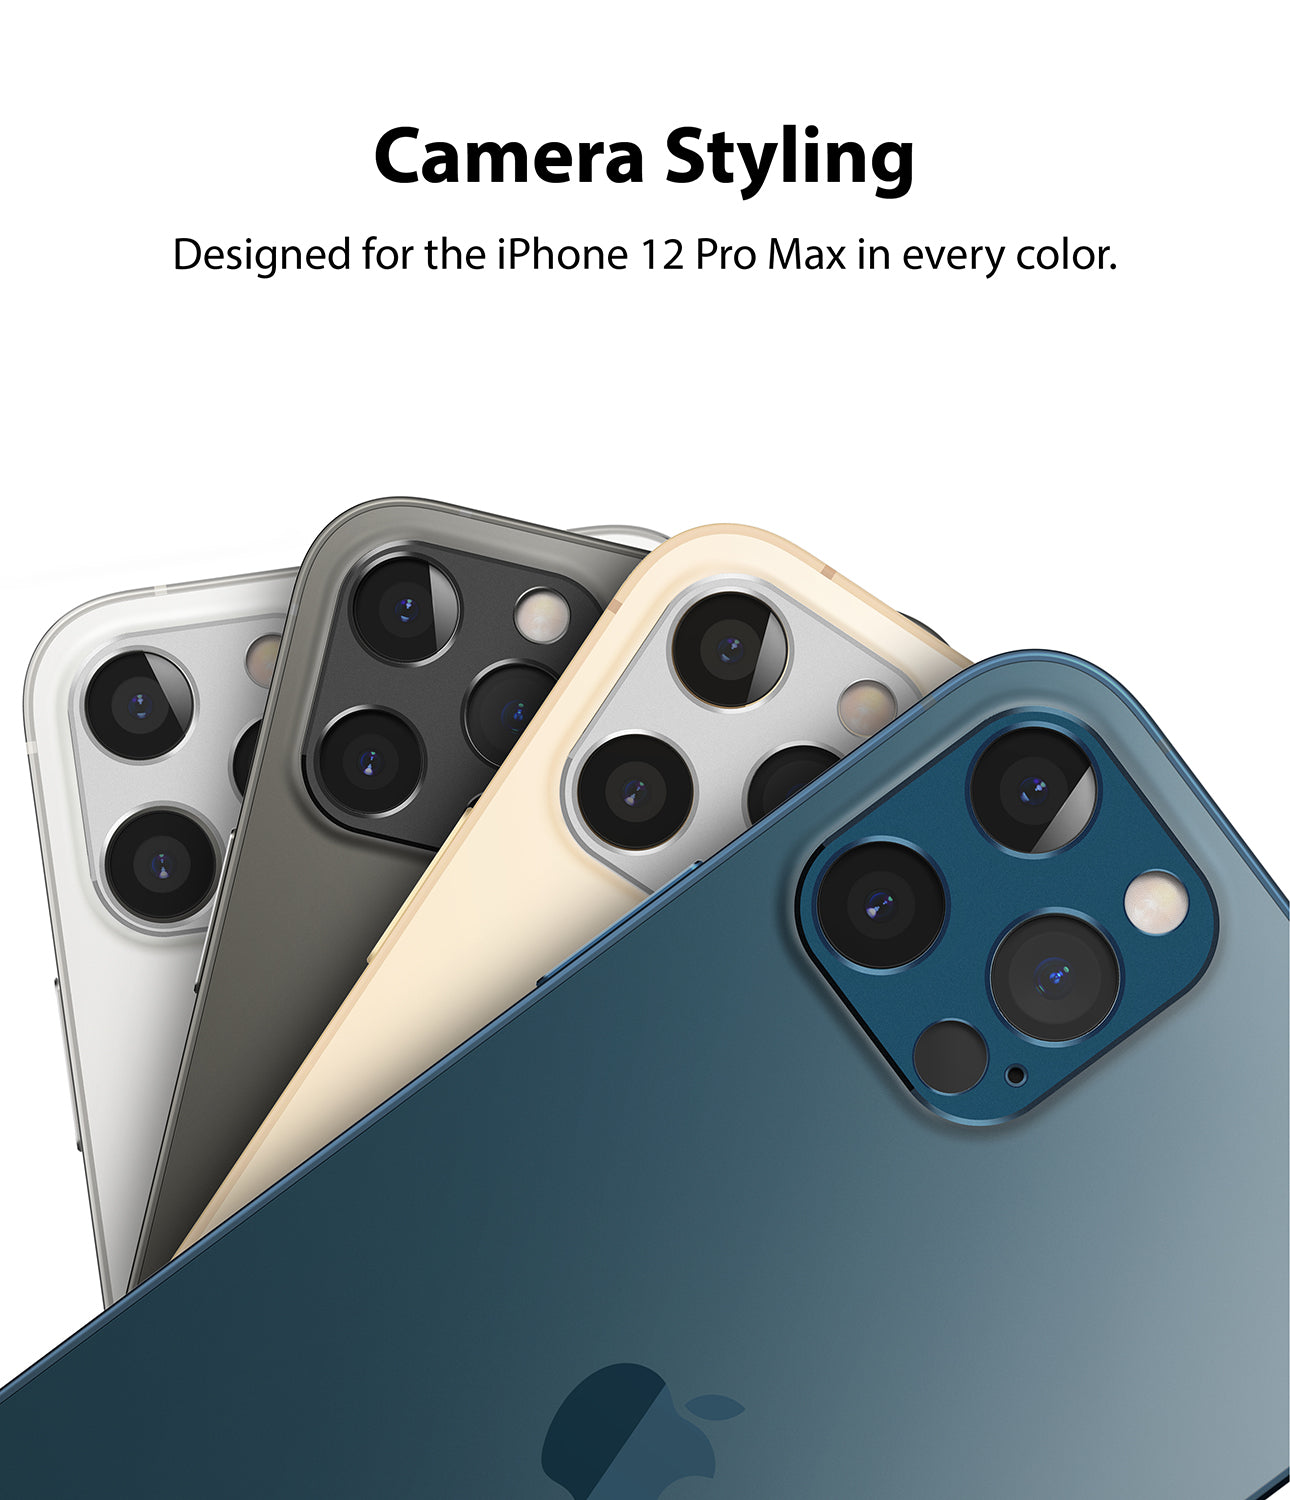 ringke camera styling for iphone 12 pro max camera lens protector 